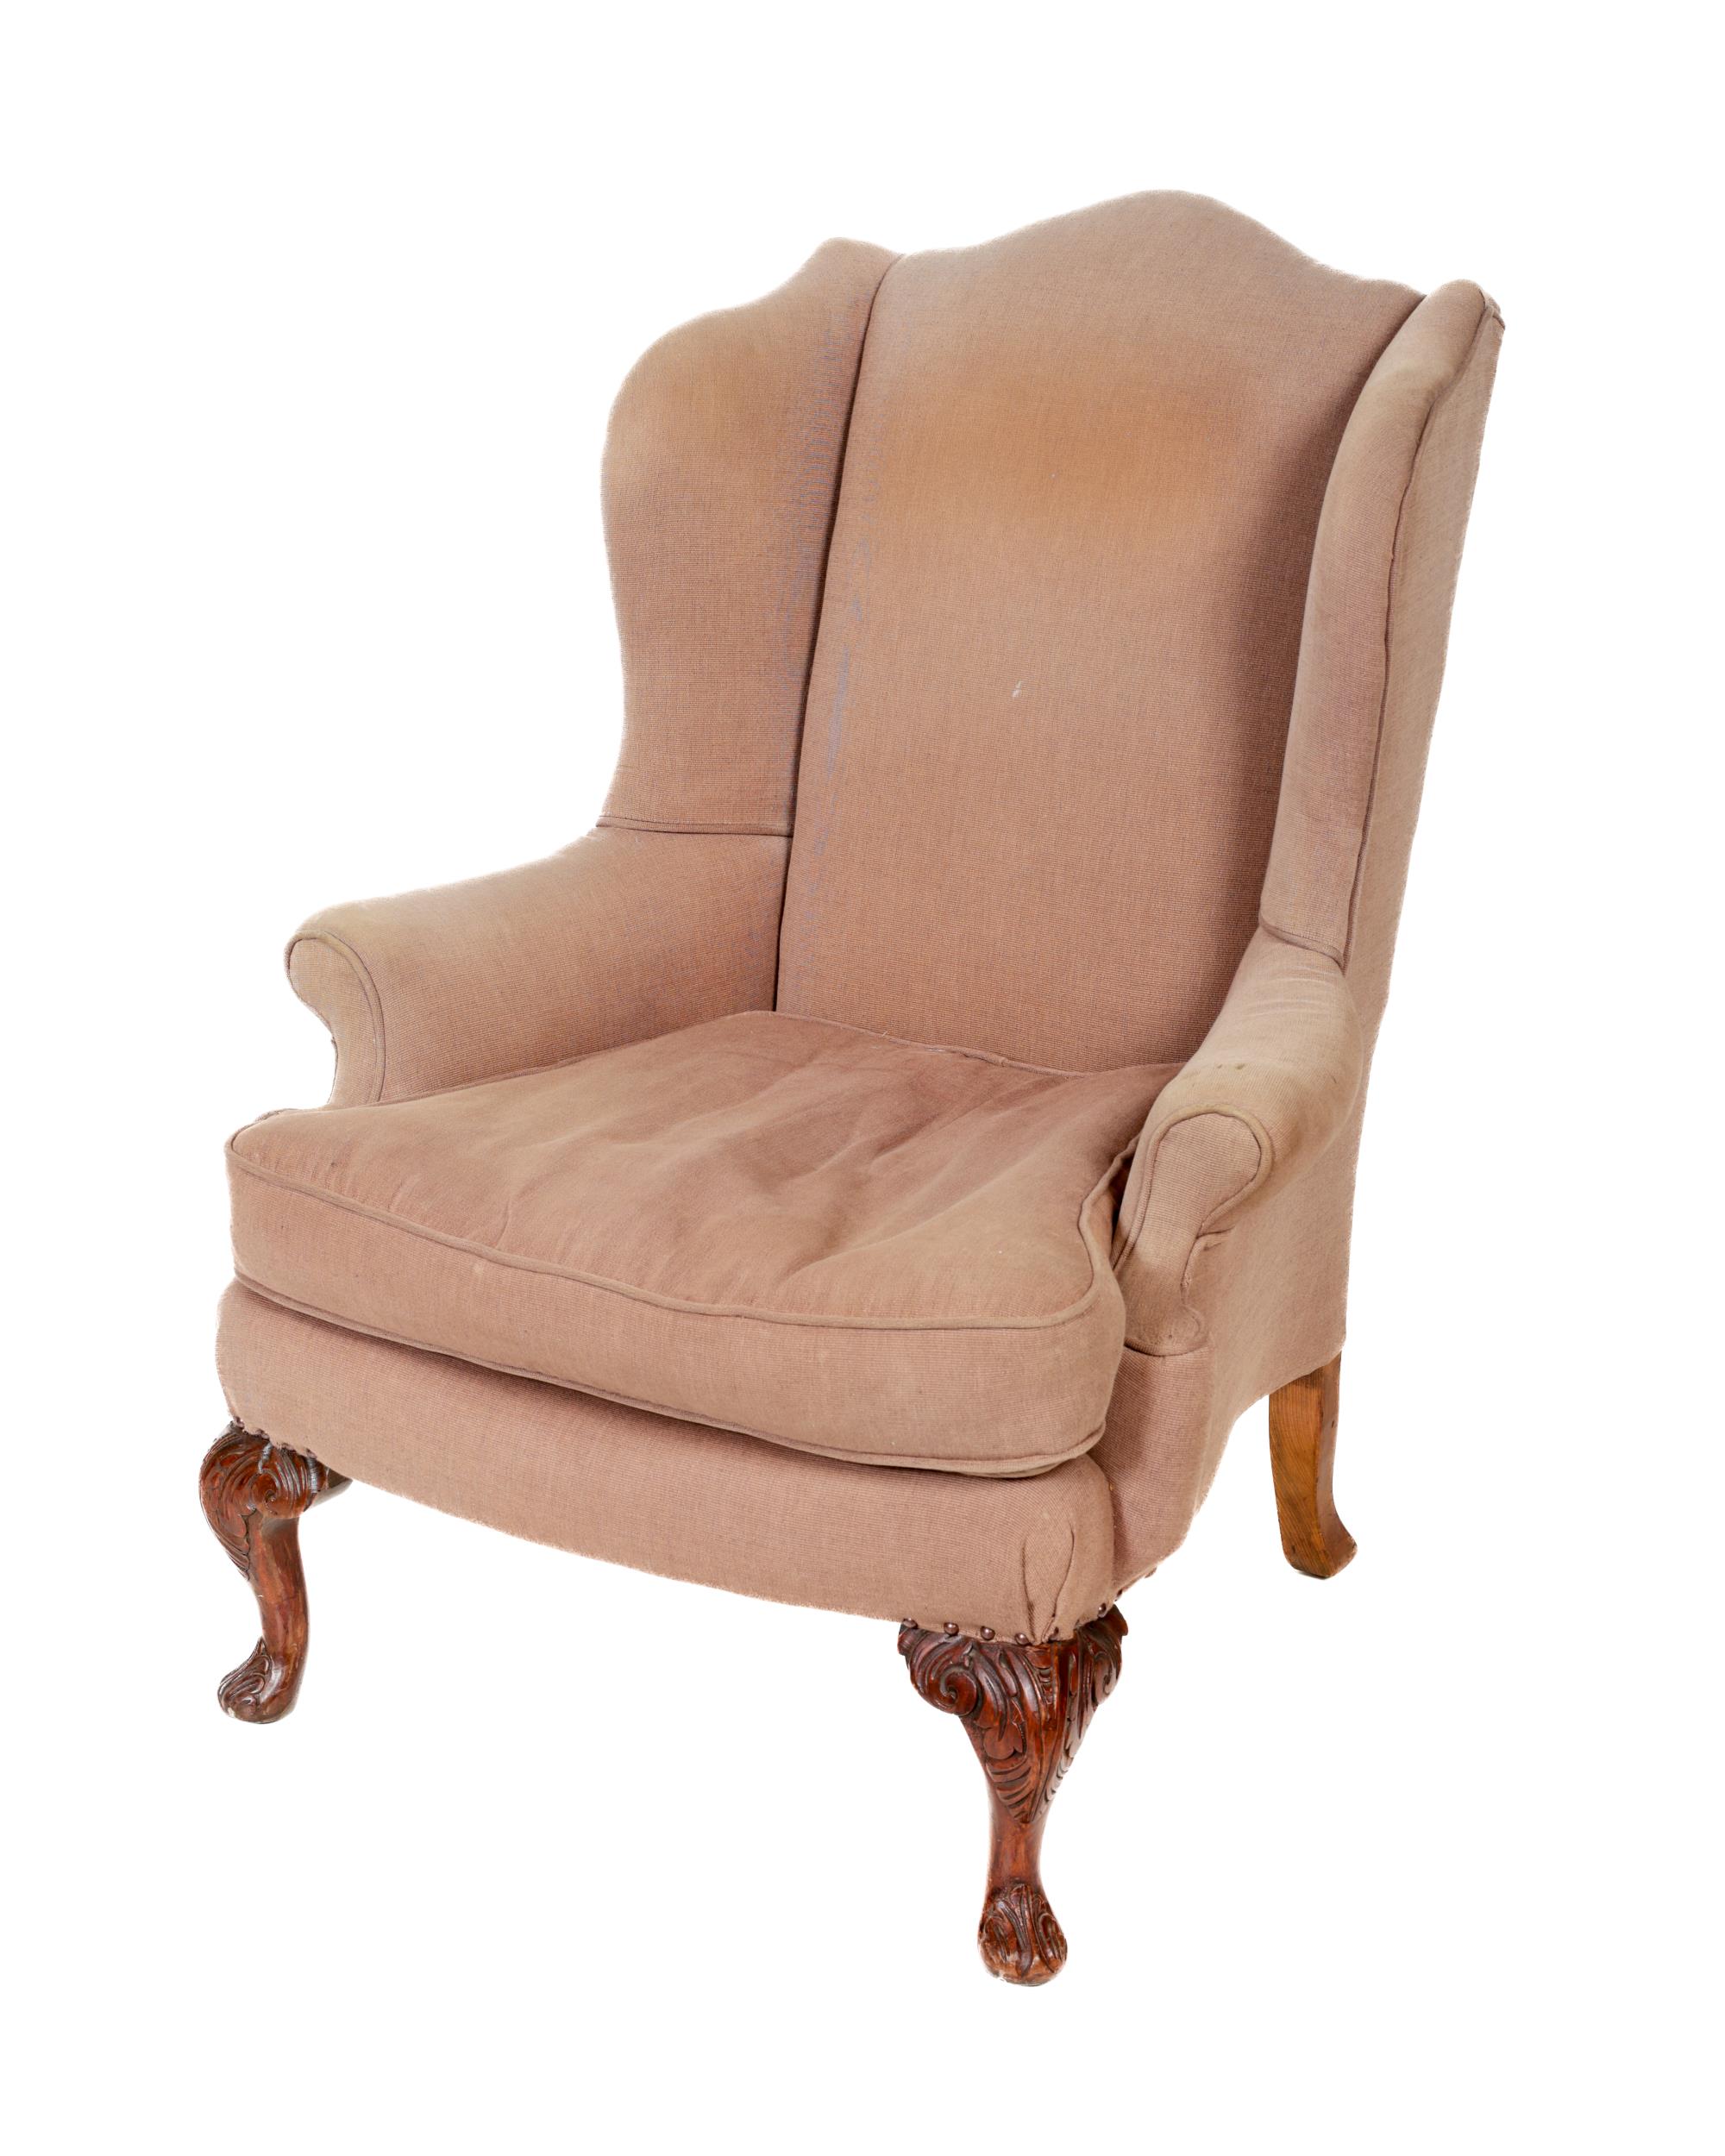 A 19th Century mahogany framed wing back Armchair, covered in cream fabric, with loose cushion, on